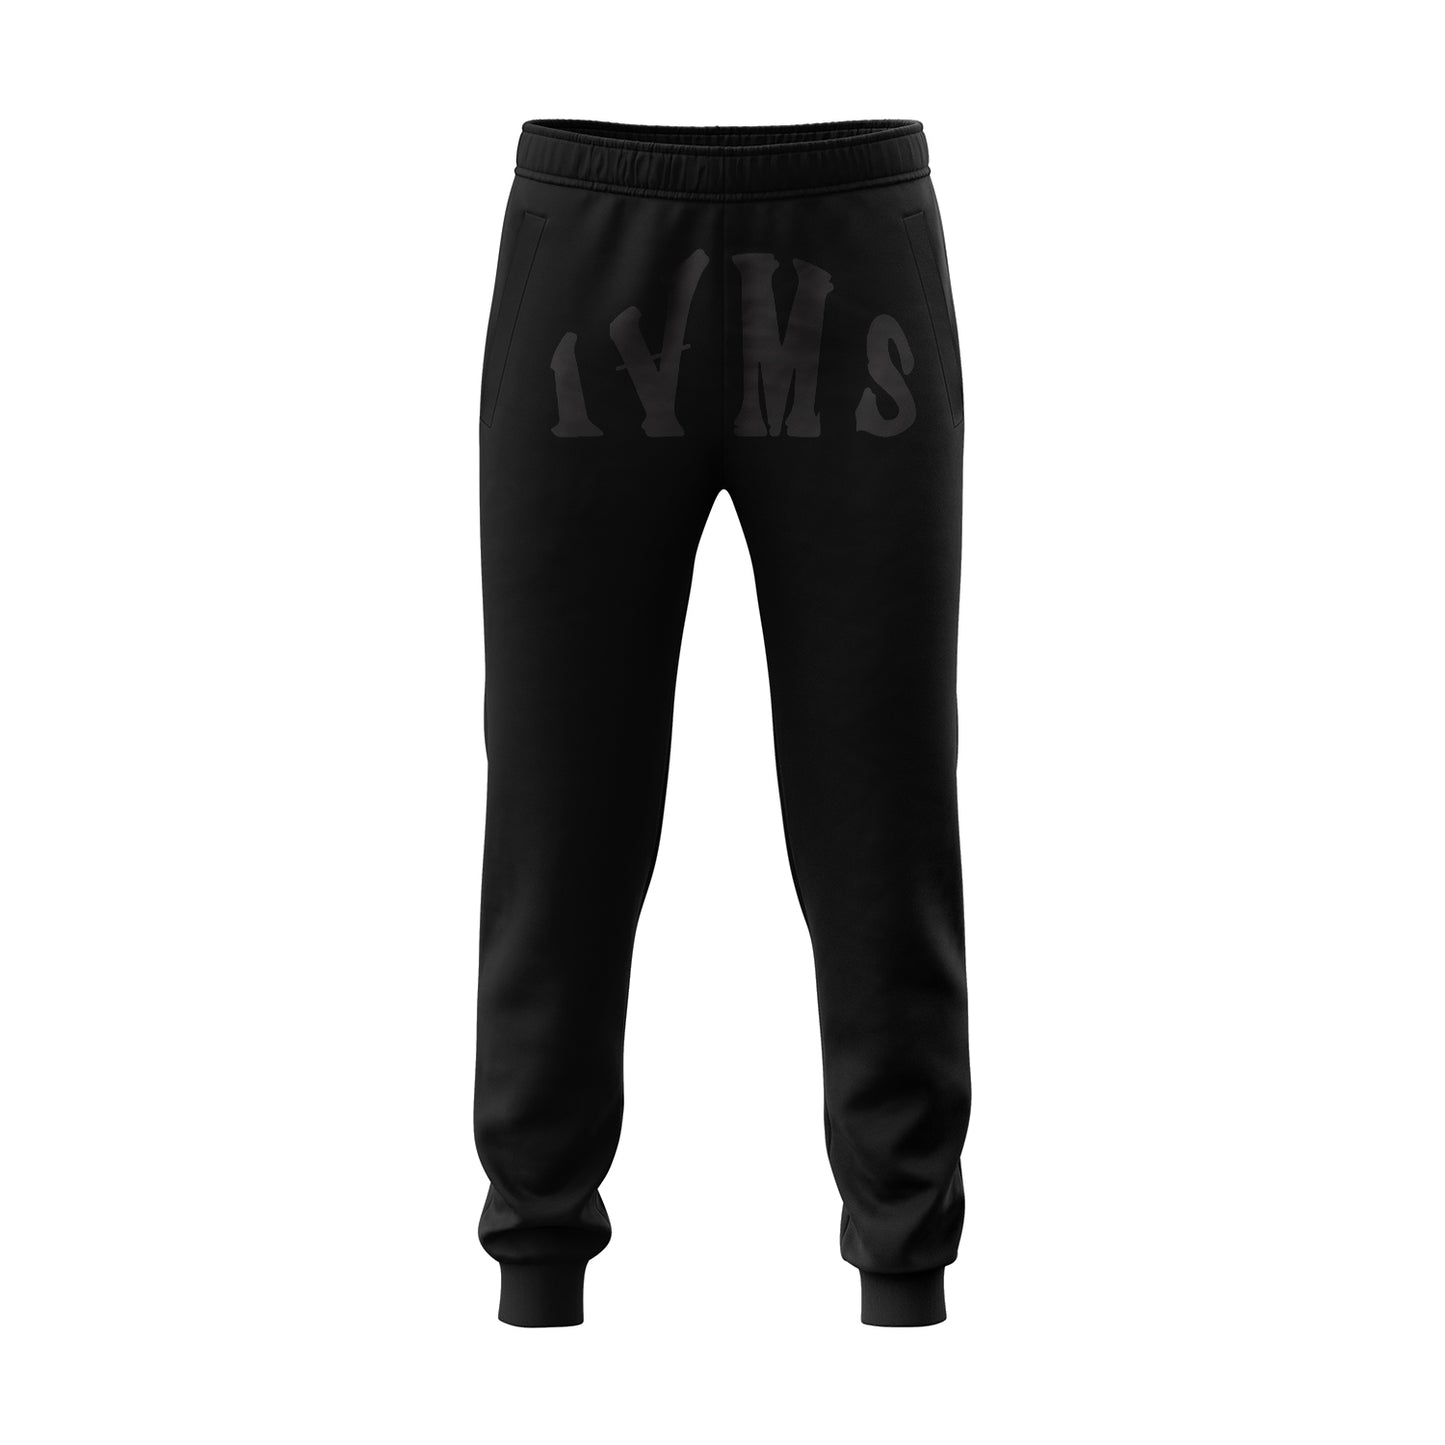 IVMS World Joggers